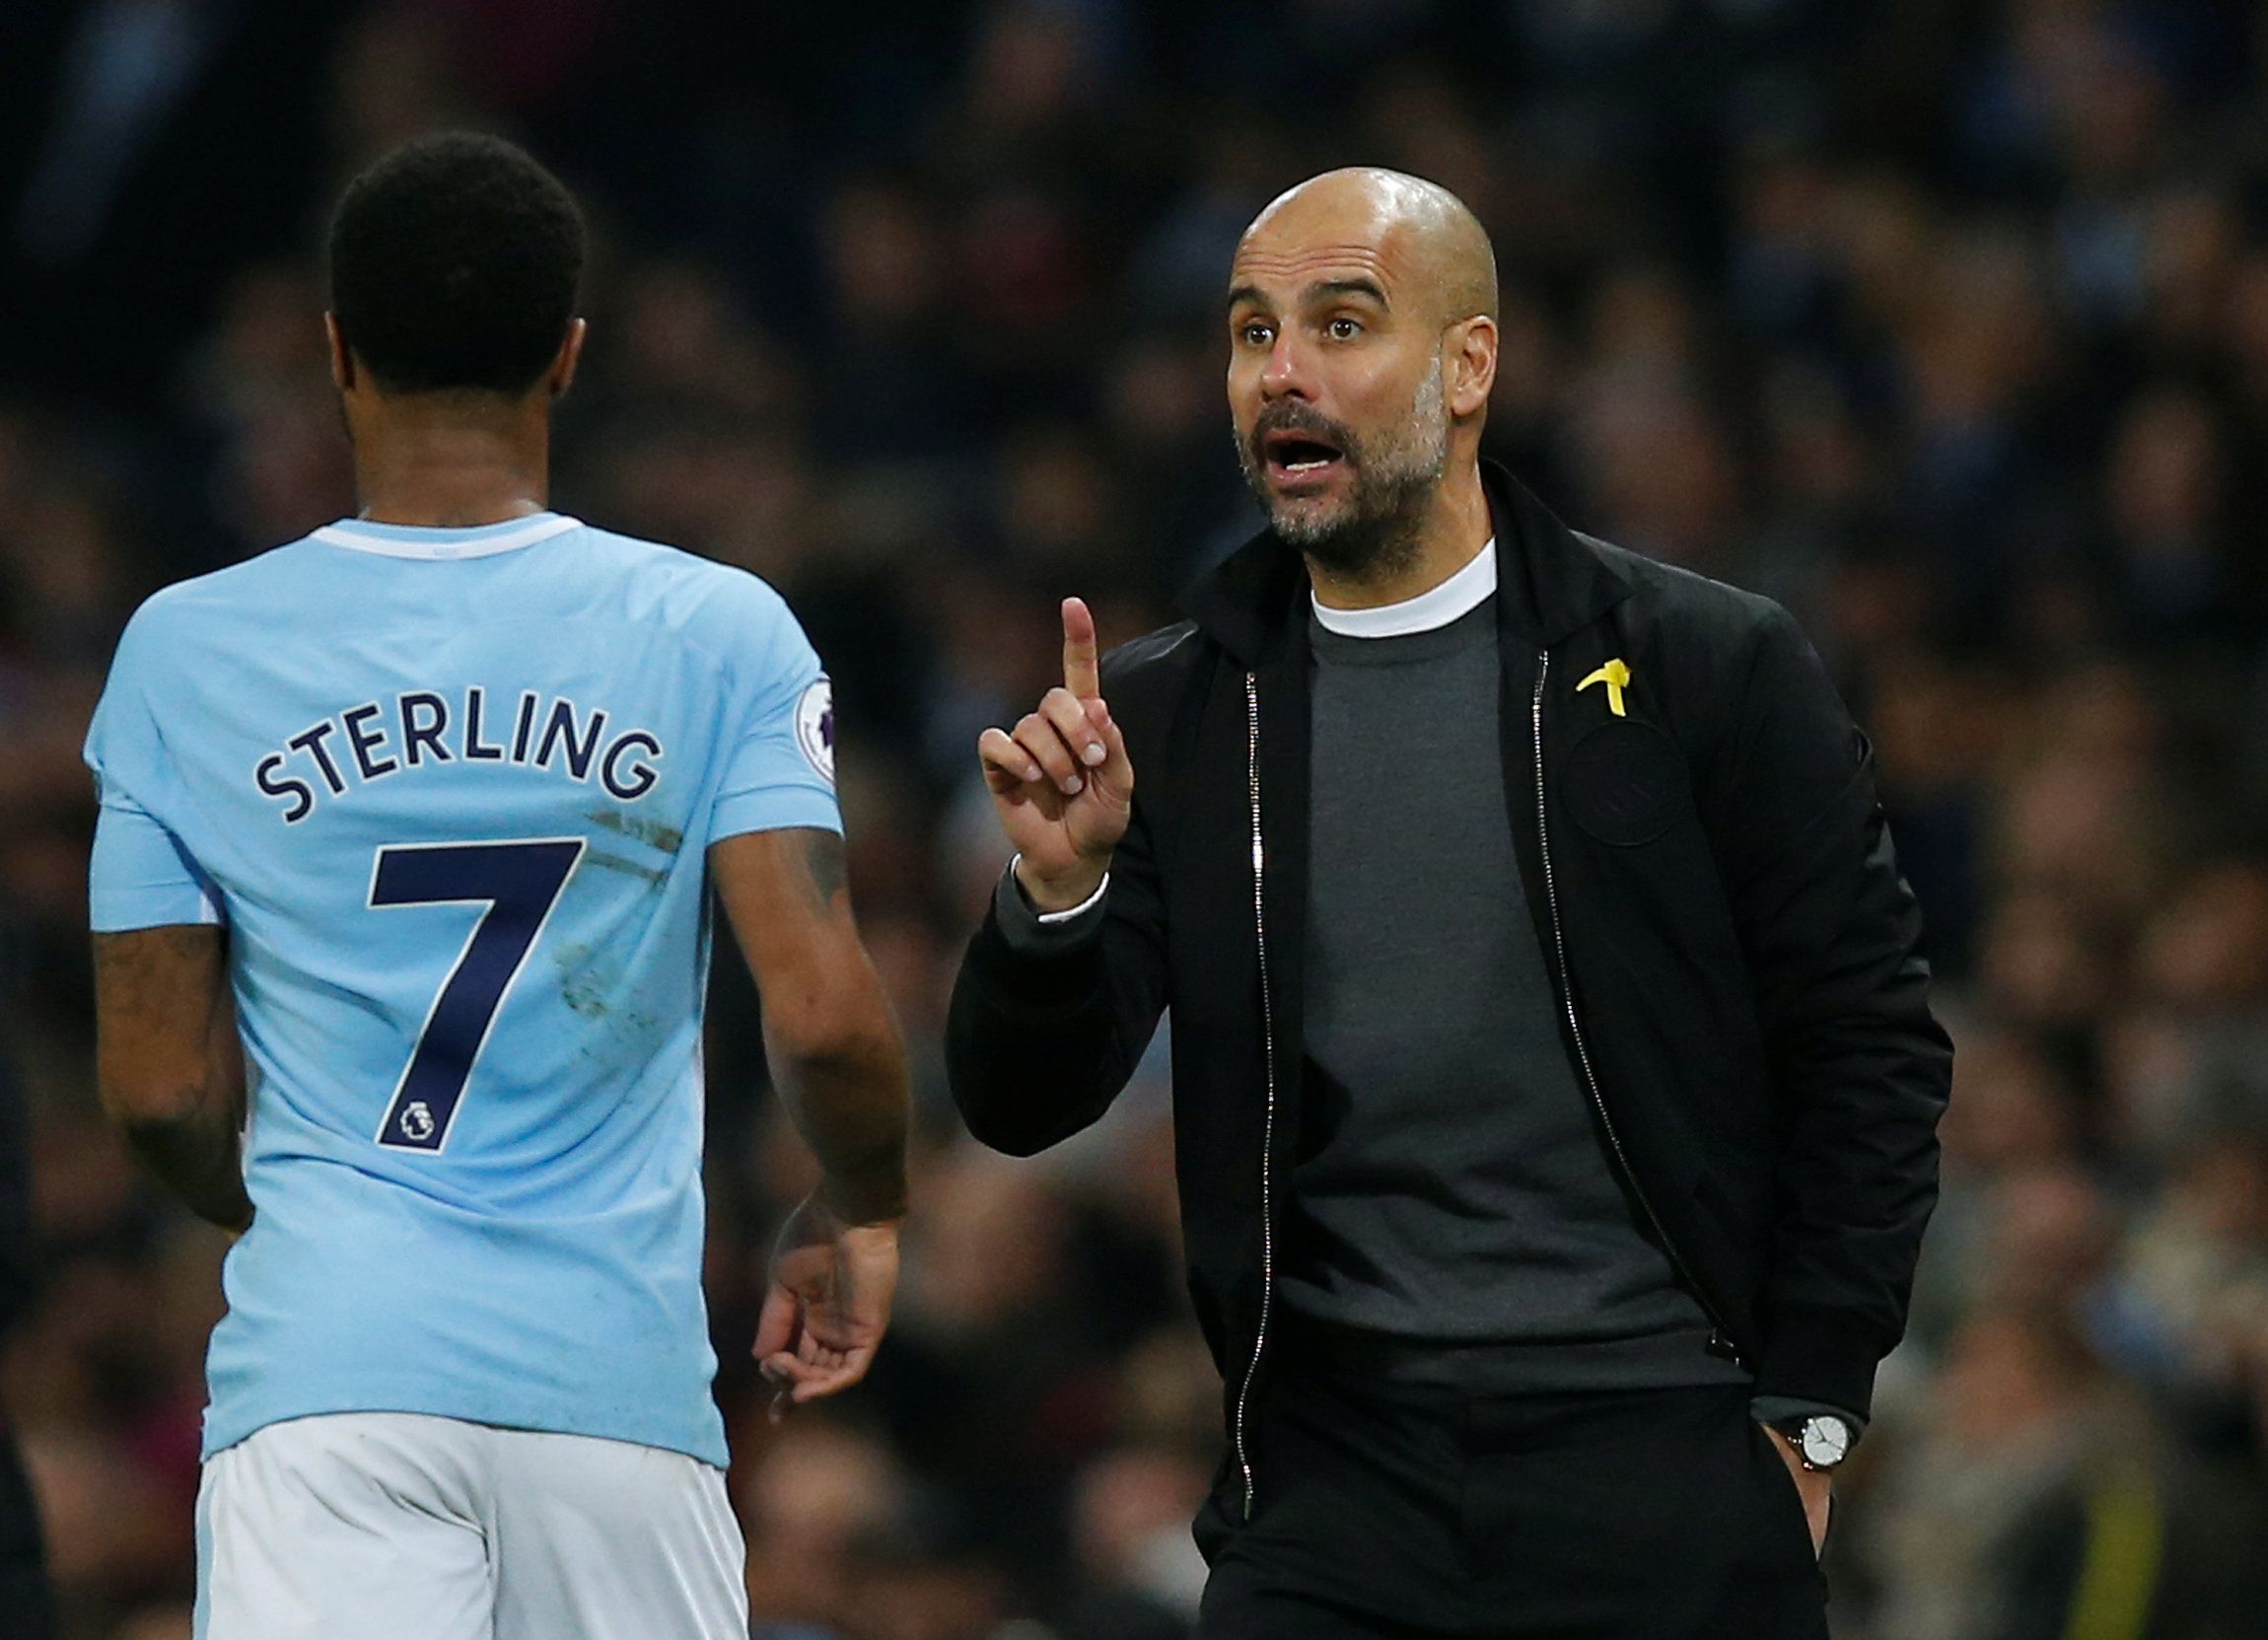 Guardiola talks to Sterling.